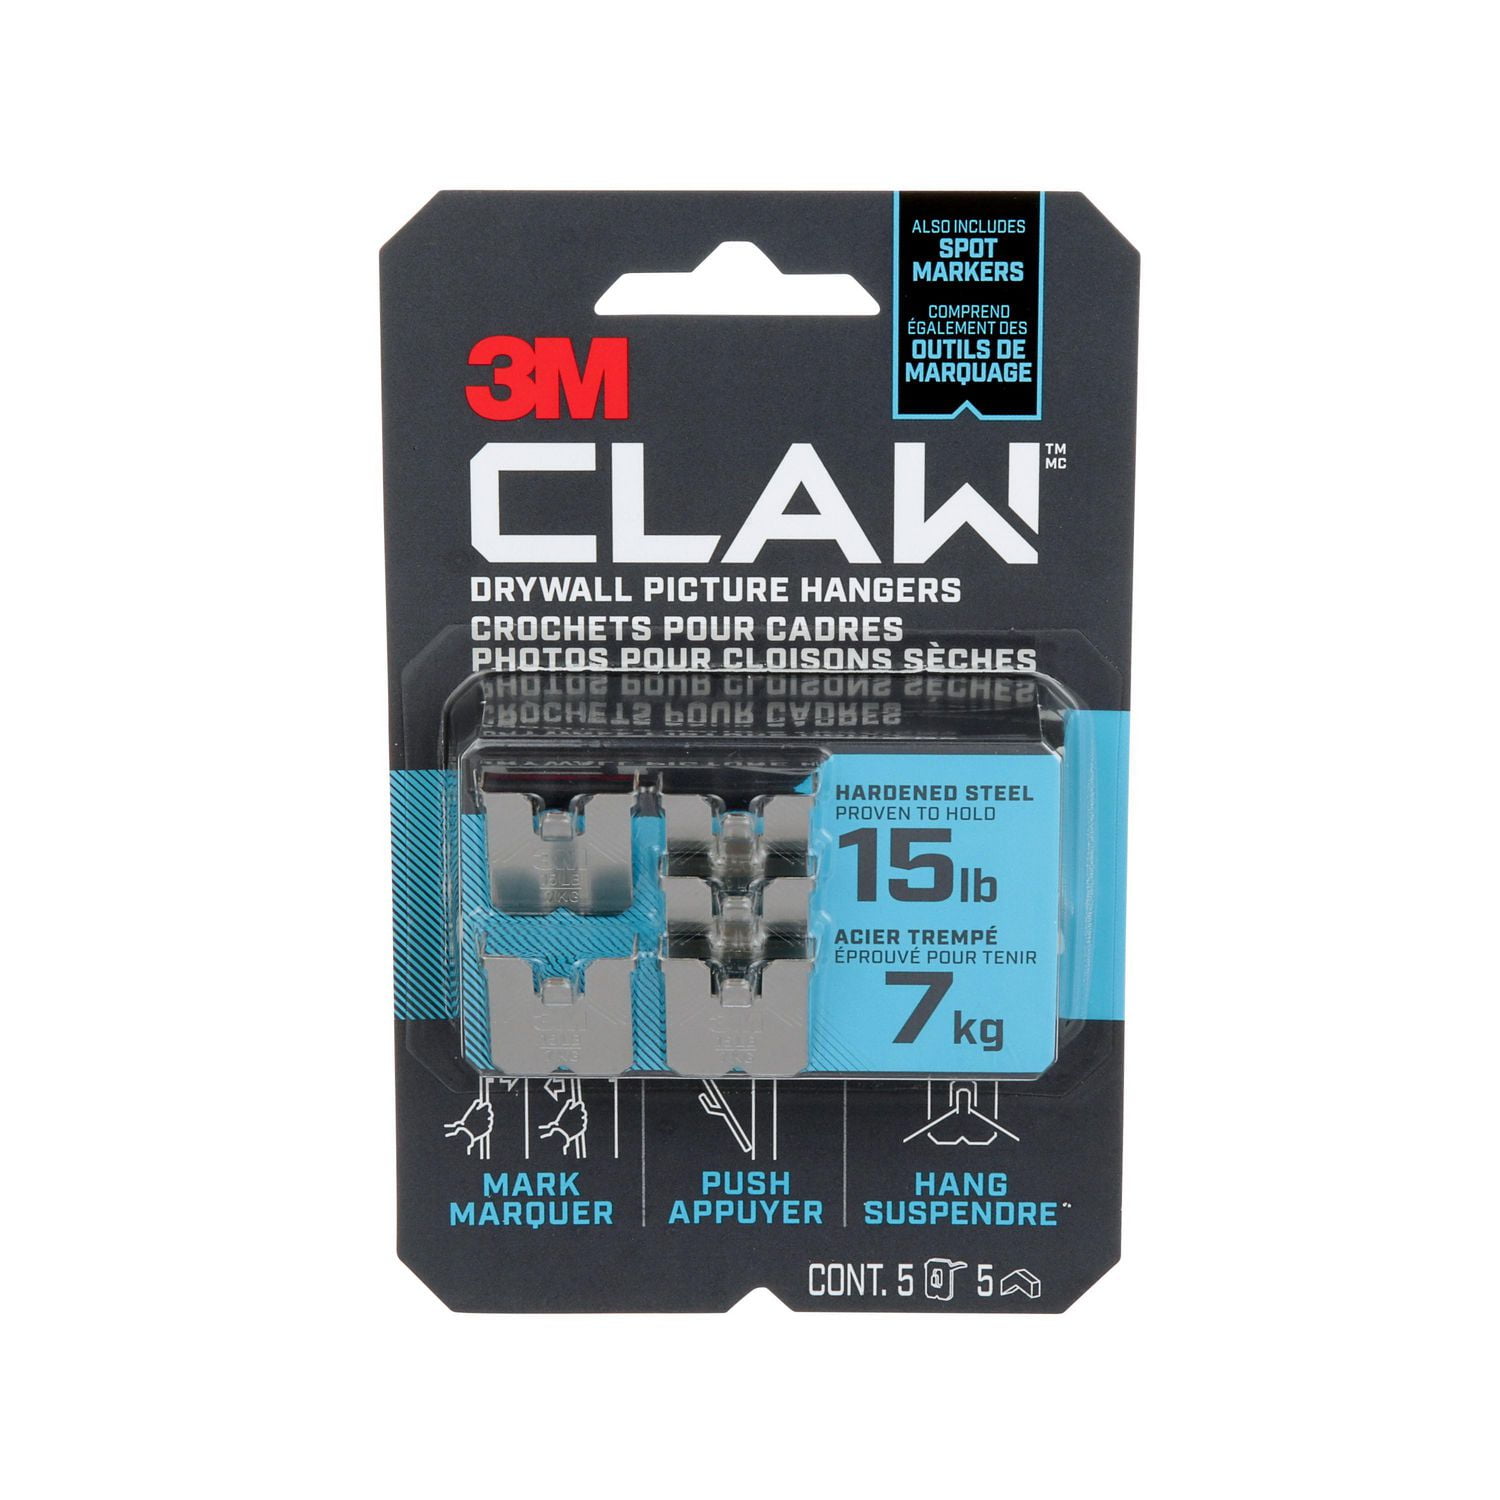 3M™ CLAW Drywall Picture Hanger with Temporary Spot Marker 3PH15M-5EF ,  Holds 15 lbs, 5 Hangers 5 Markers/Pack 